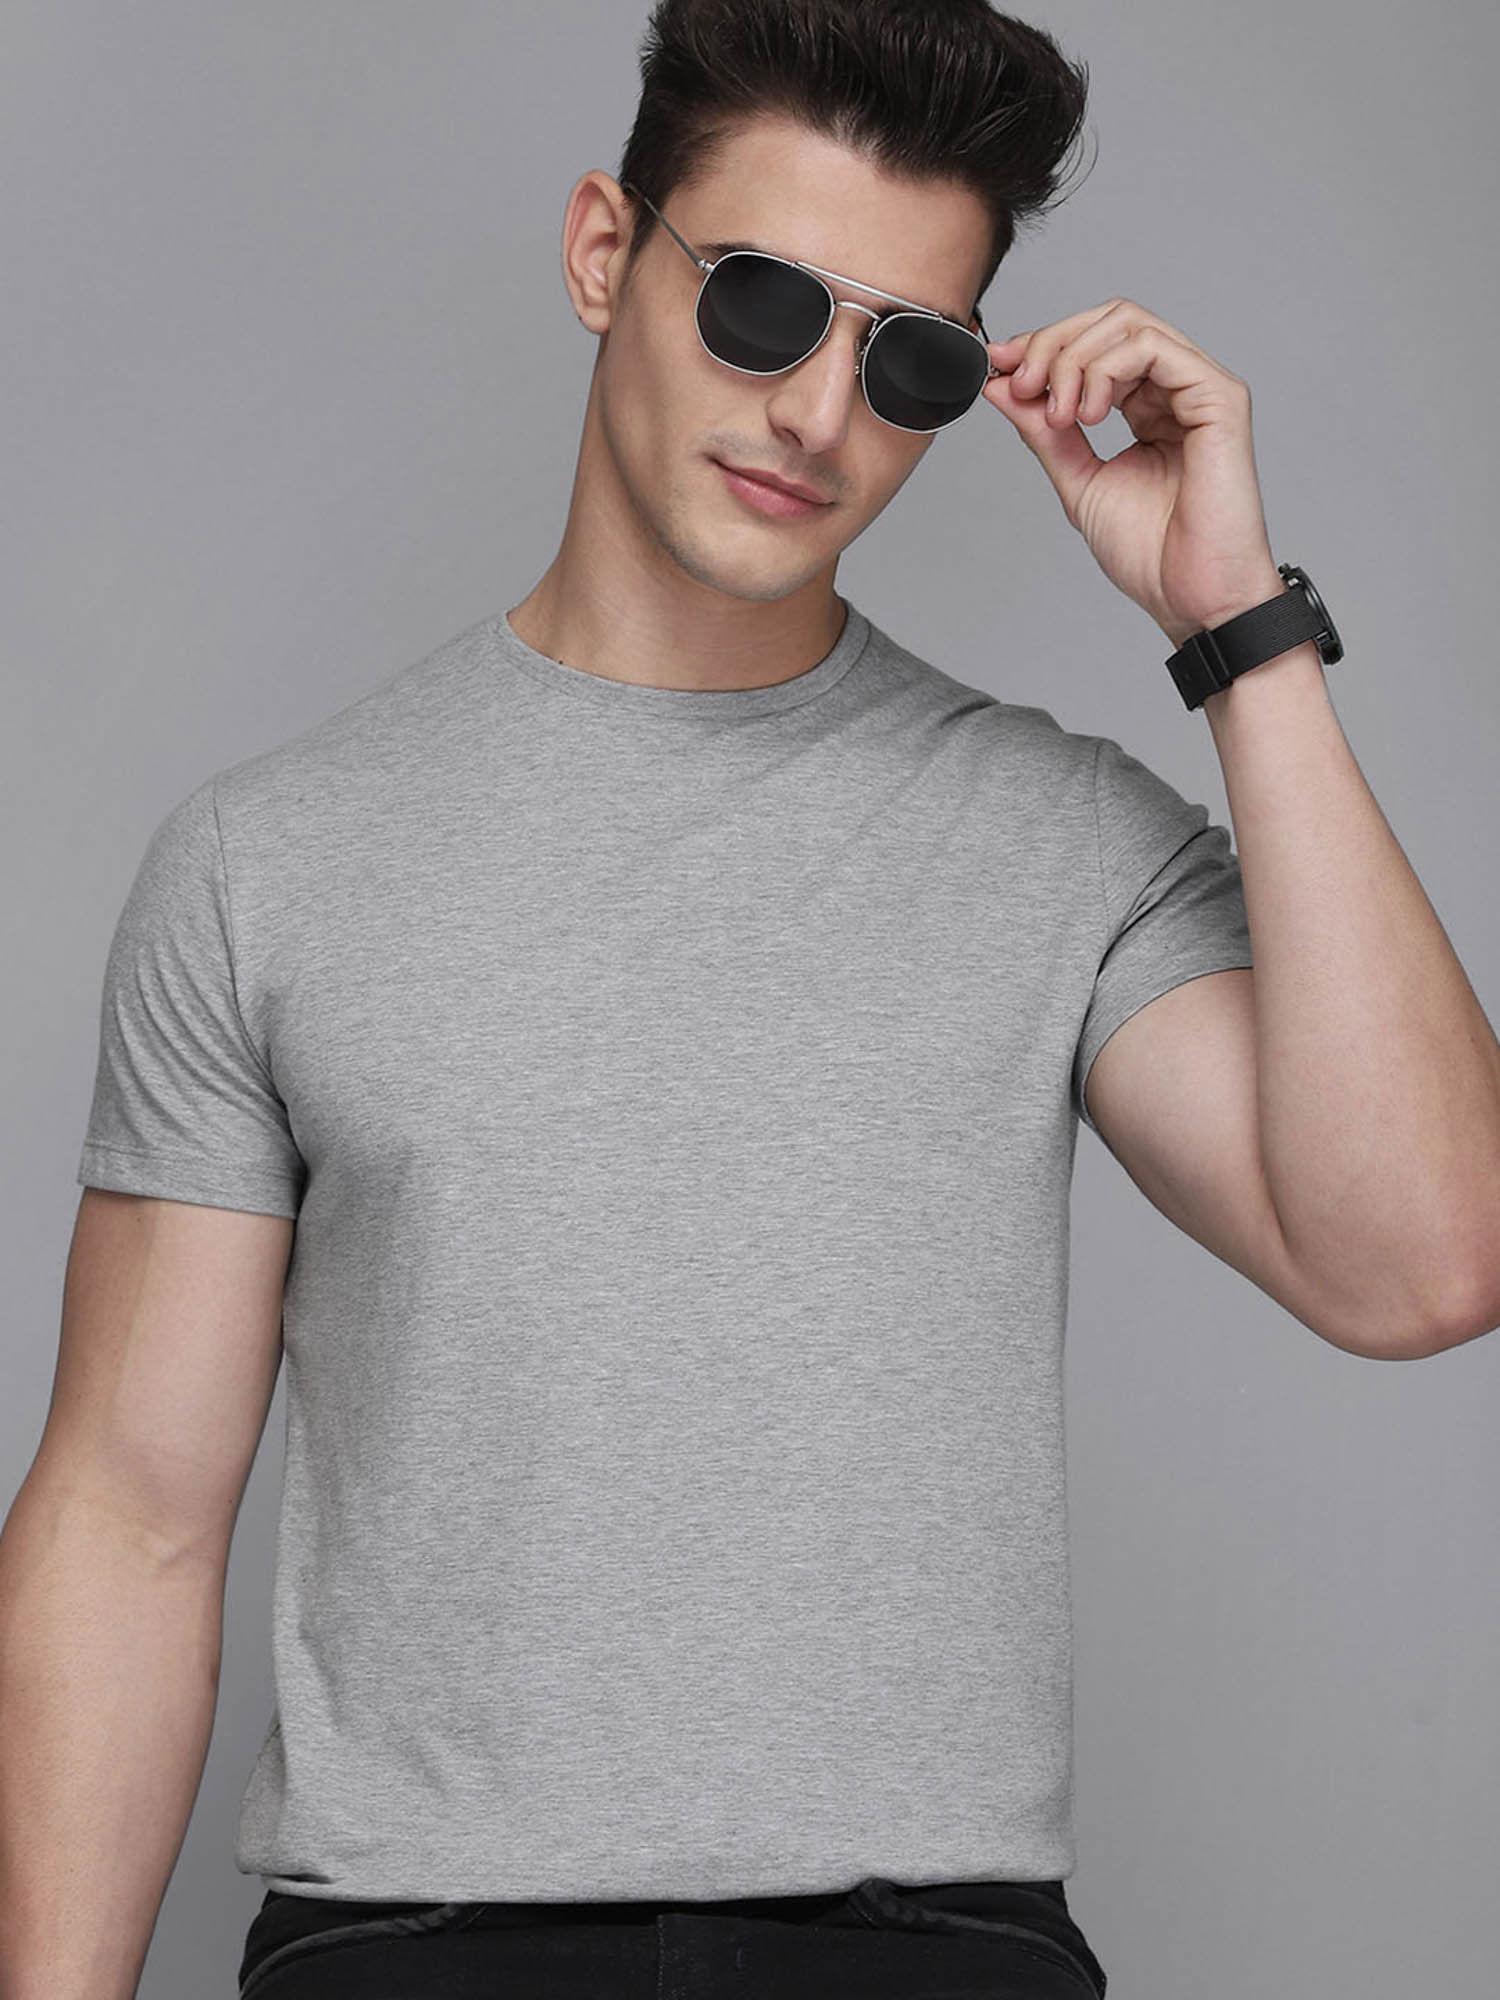 featured grey tee for young men